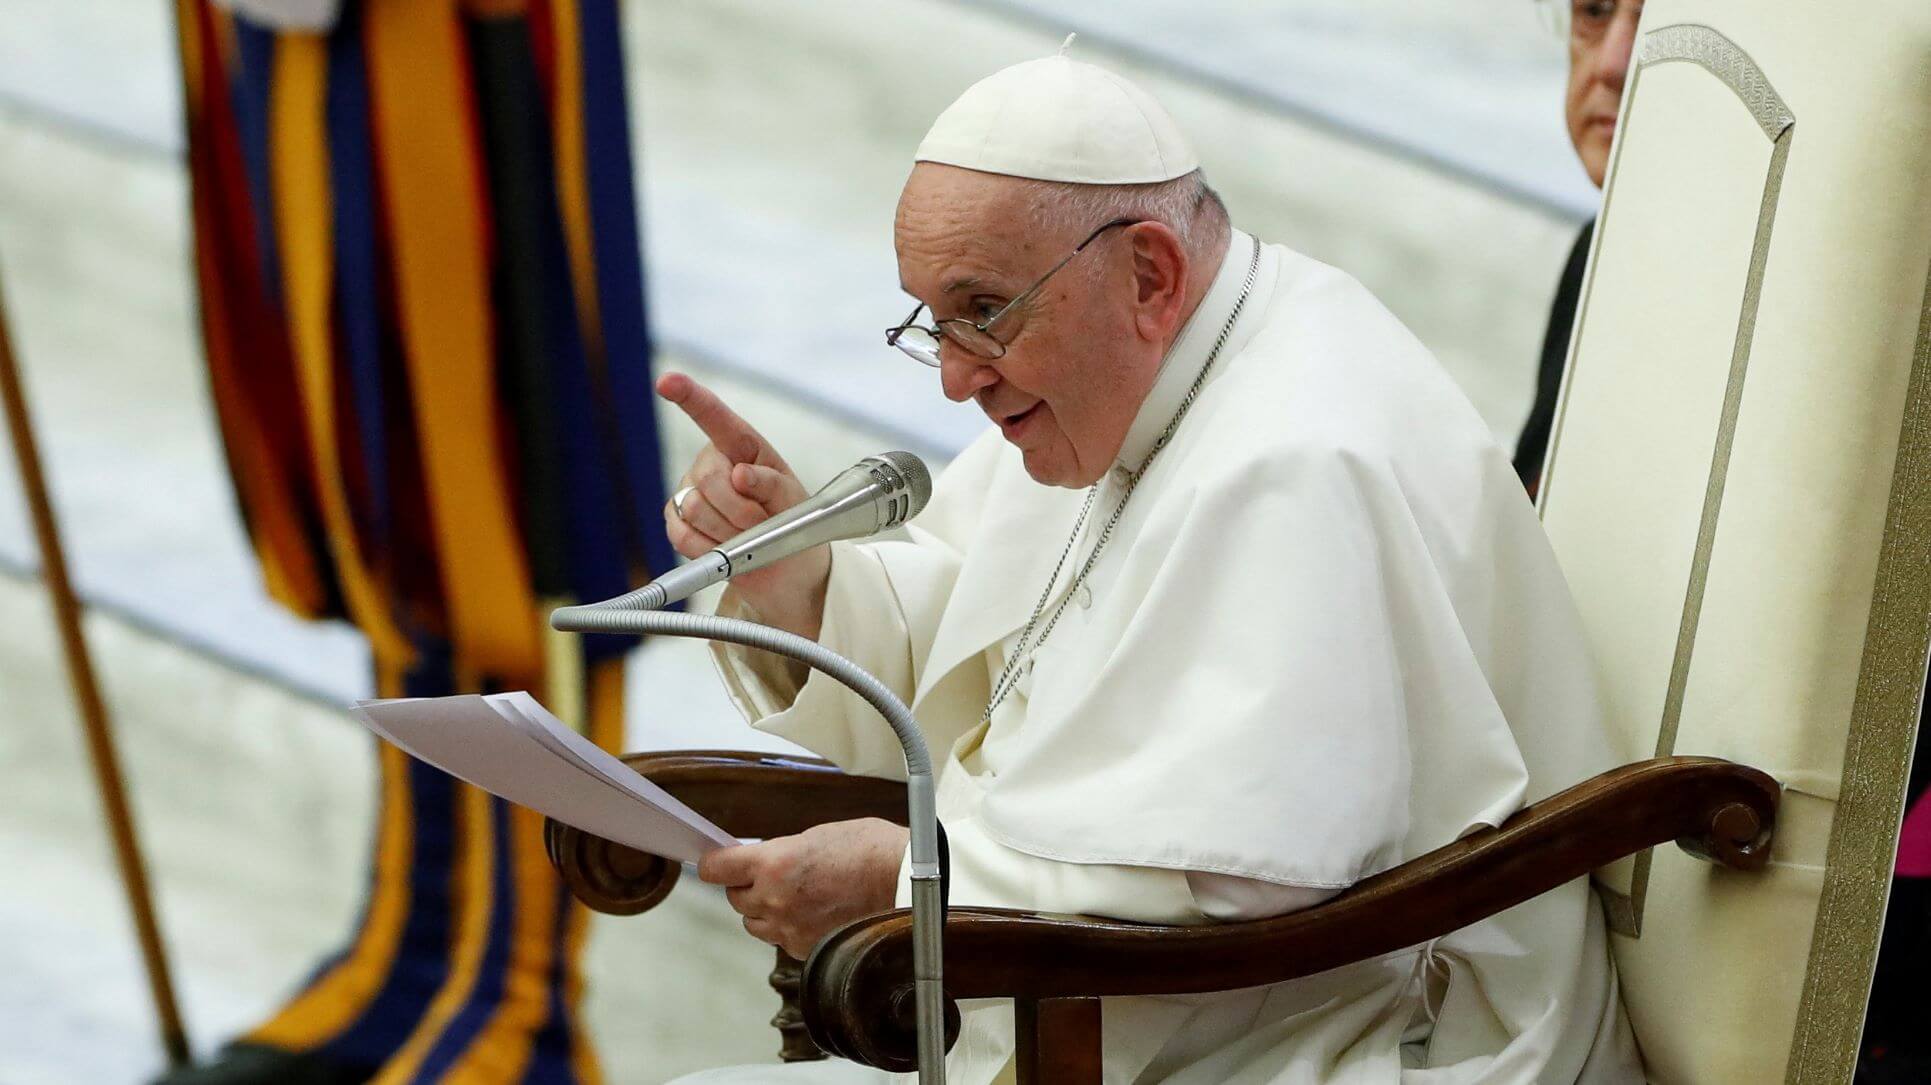 Taxes Can Be Key To Social Justice, Pope Tells Business Leaders